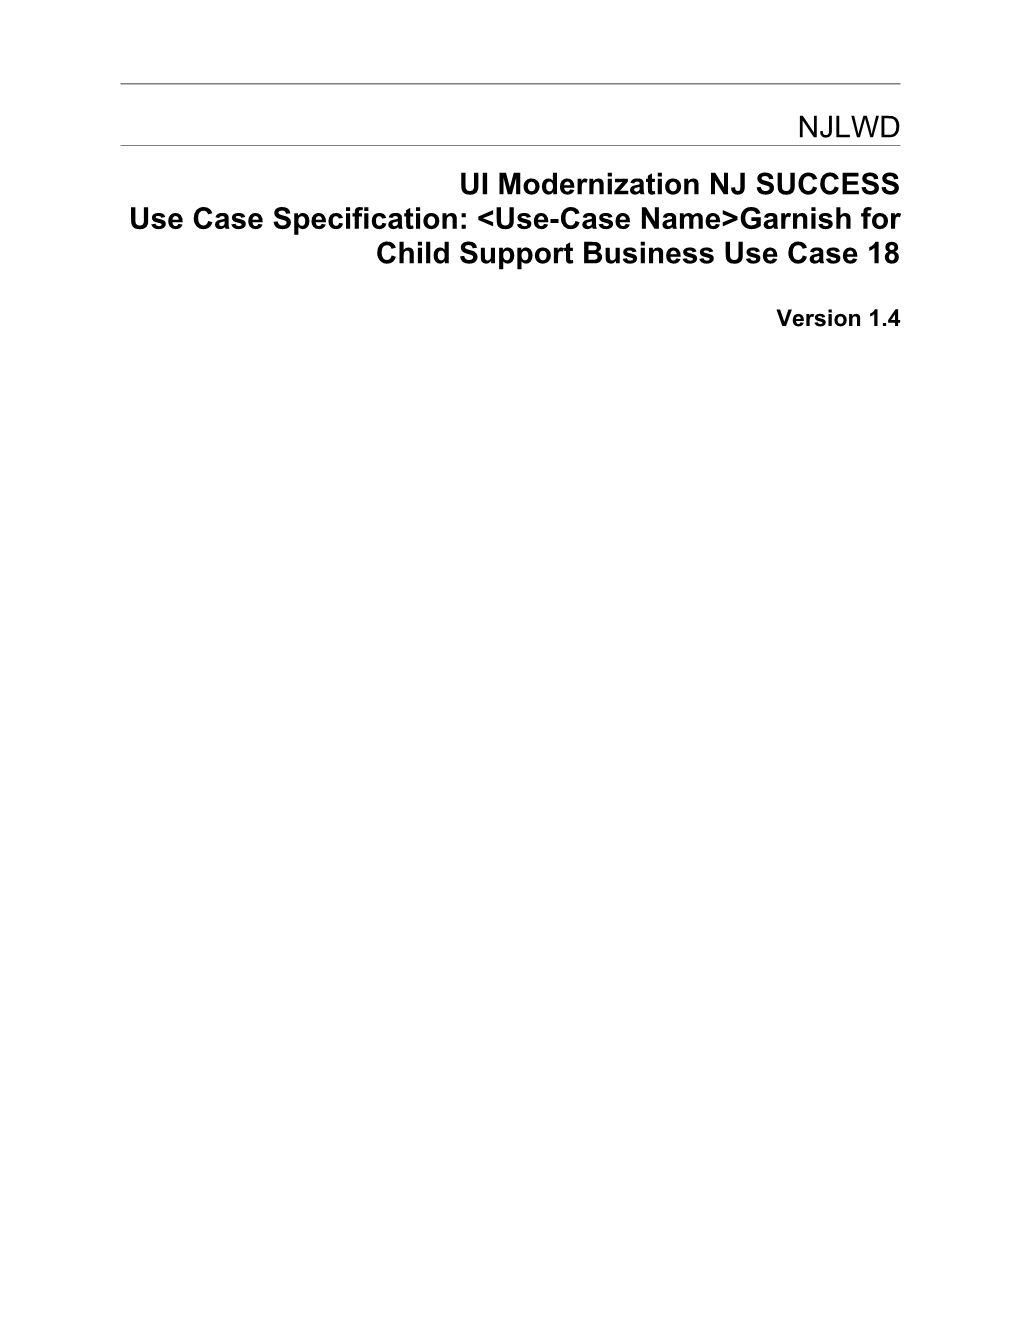 Use Case Specification: Use-Case Name s1